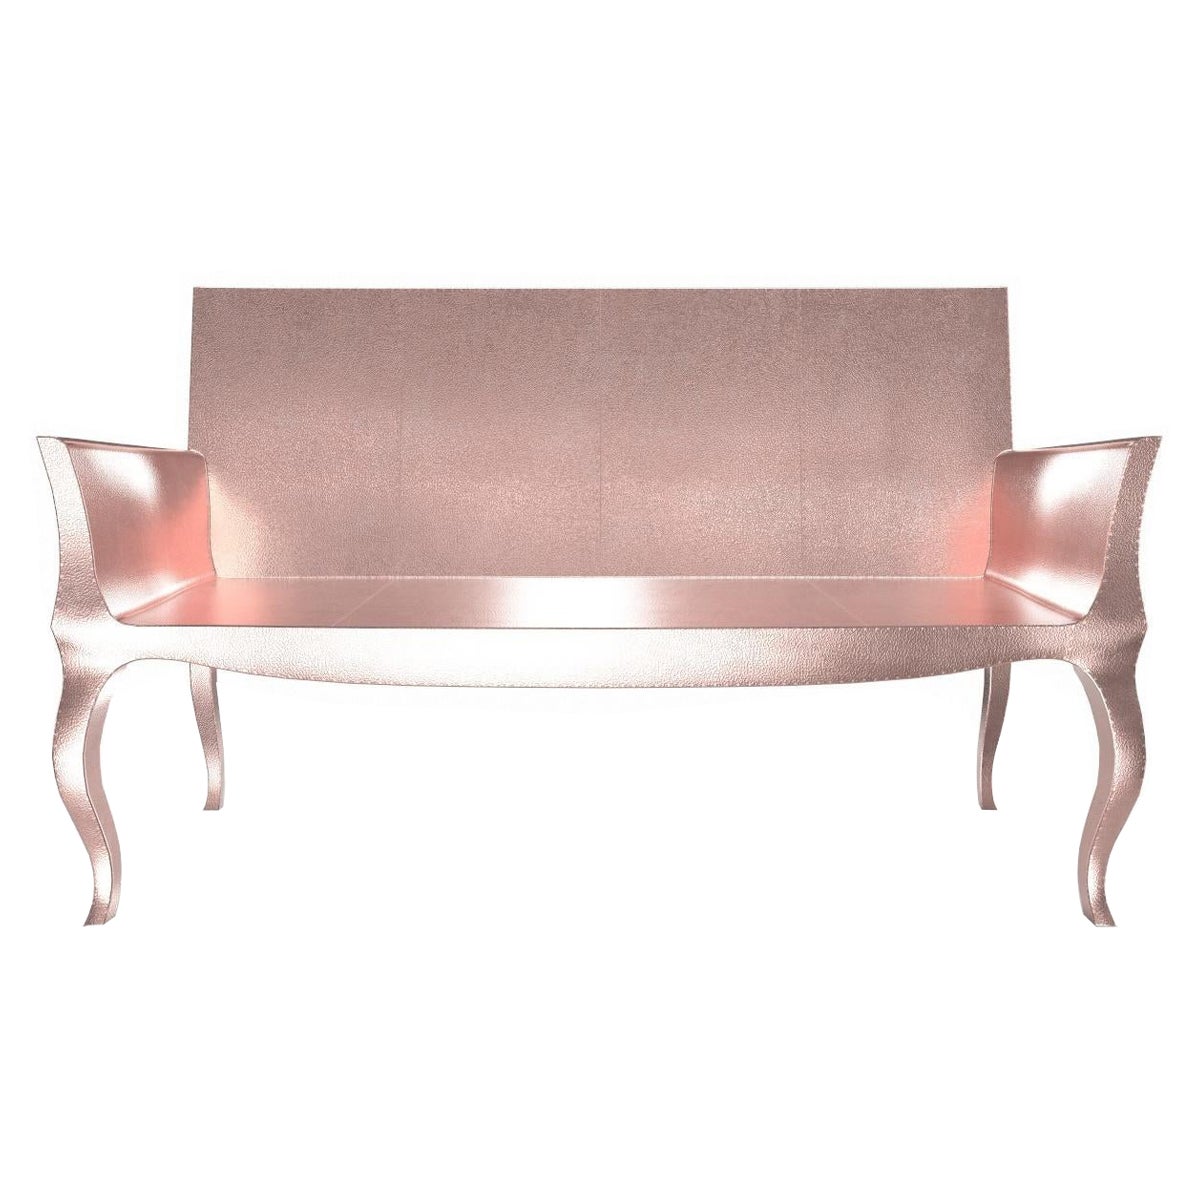 Louise Settee Art Deco Living Room Sets in Fine Hammered Copper by Paul Mathieu For Sale